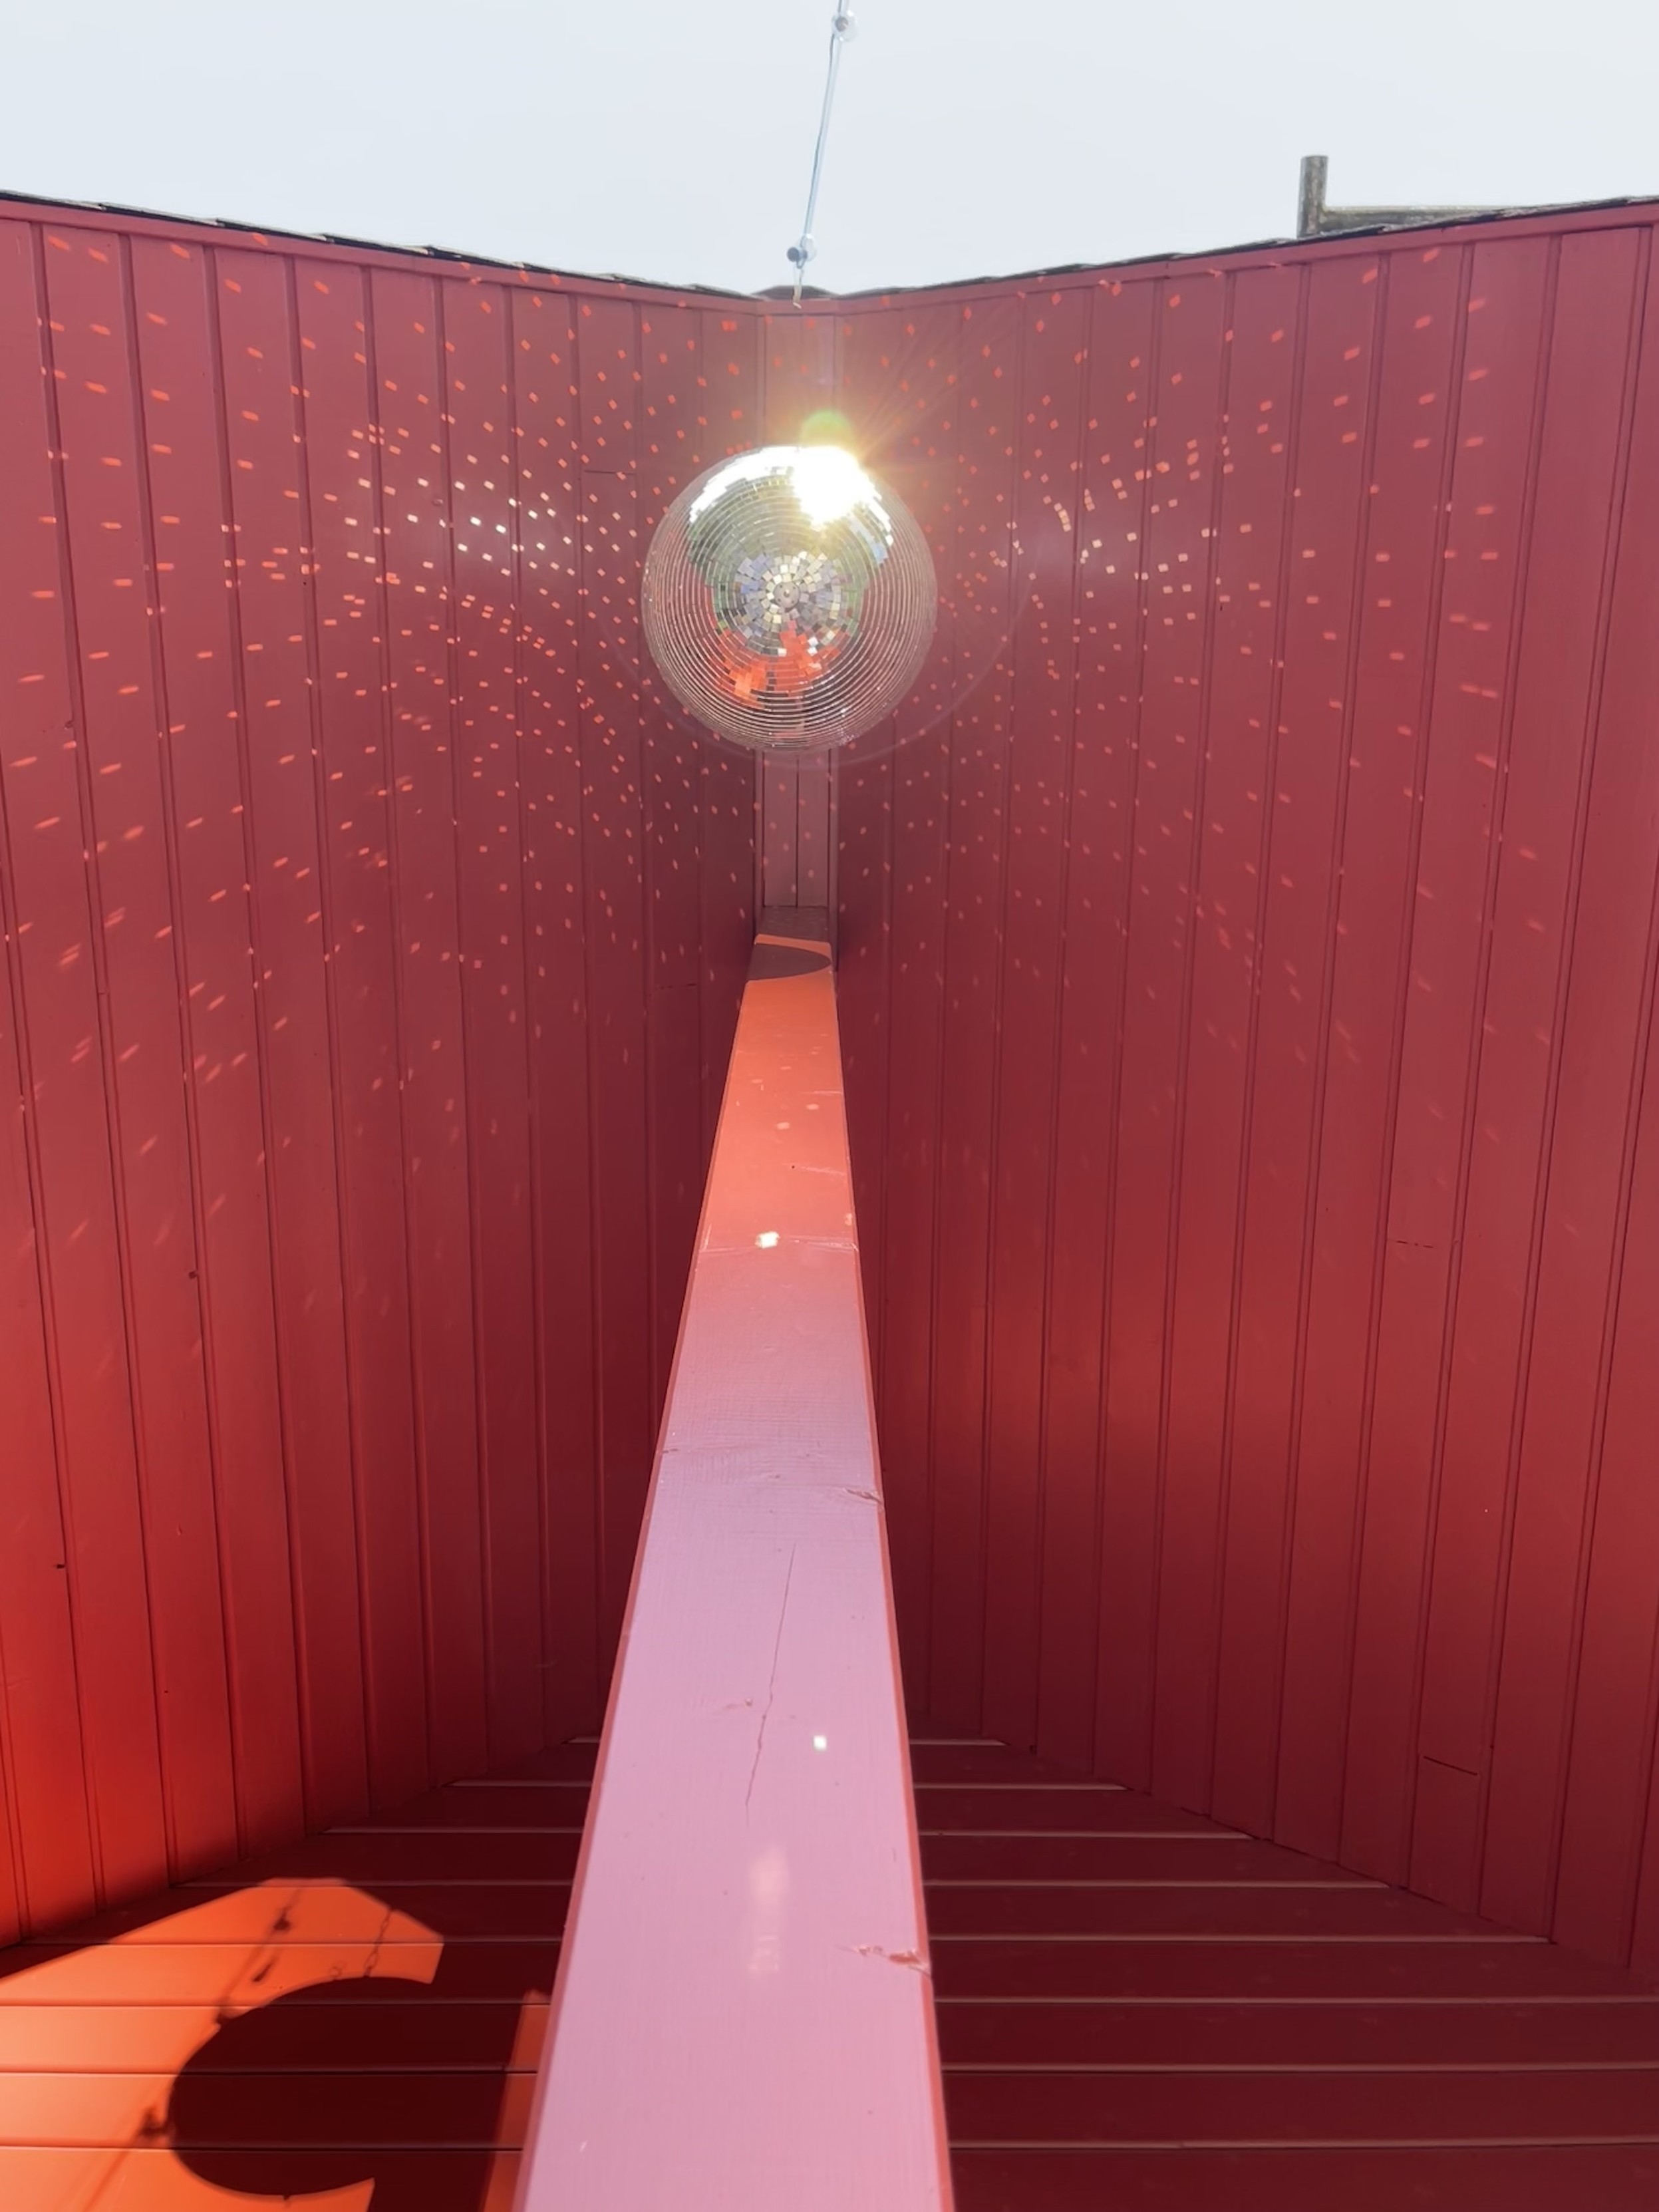 A disco ball hanging inside a red wooden ceiling structure, reflecting light and creating a pattern of small light dots on the walls.